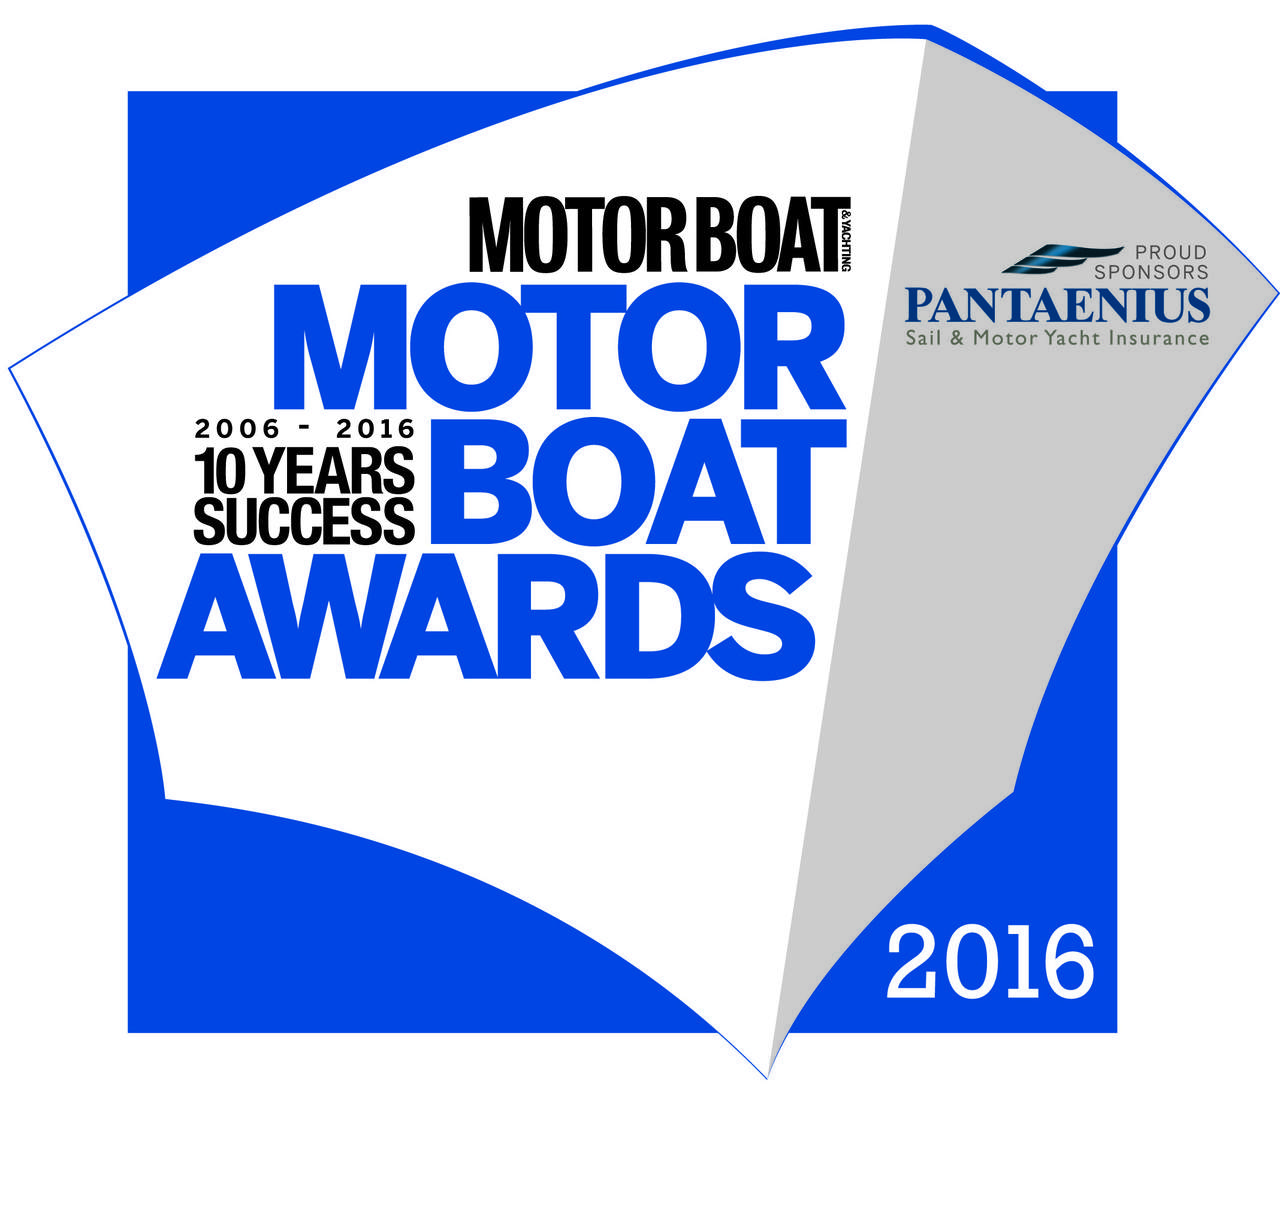 The PRESTIGE 680 has been selected as a finalist for the 2016 Motor Boat of The Year Awards 9